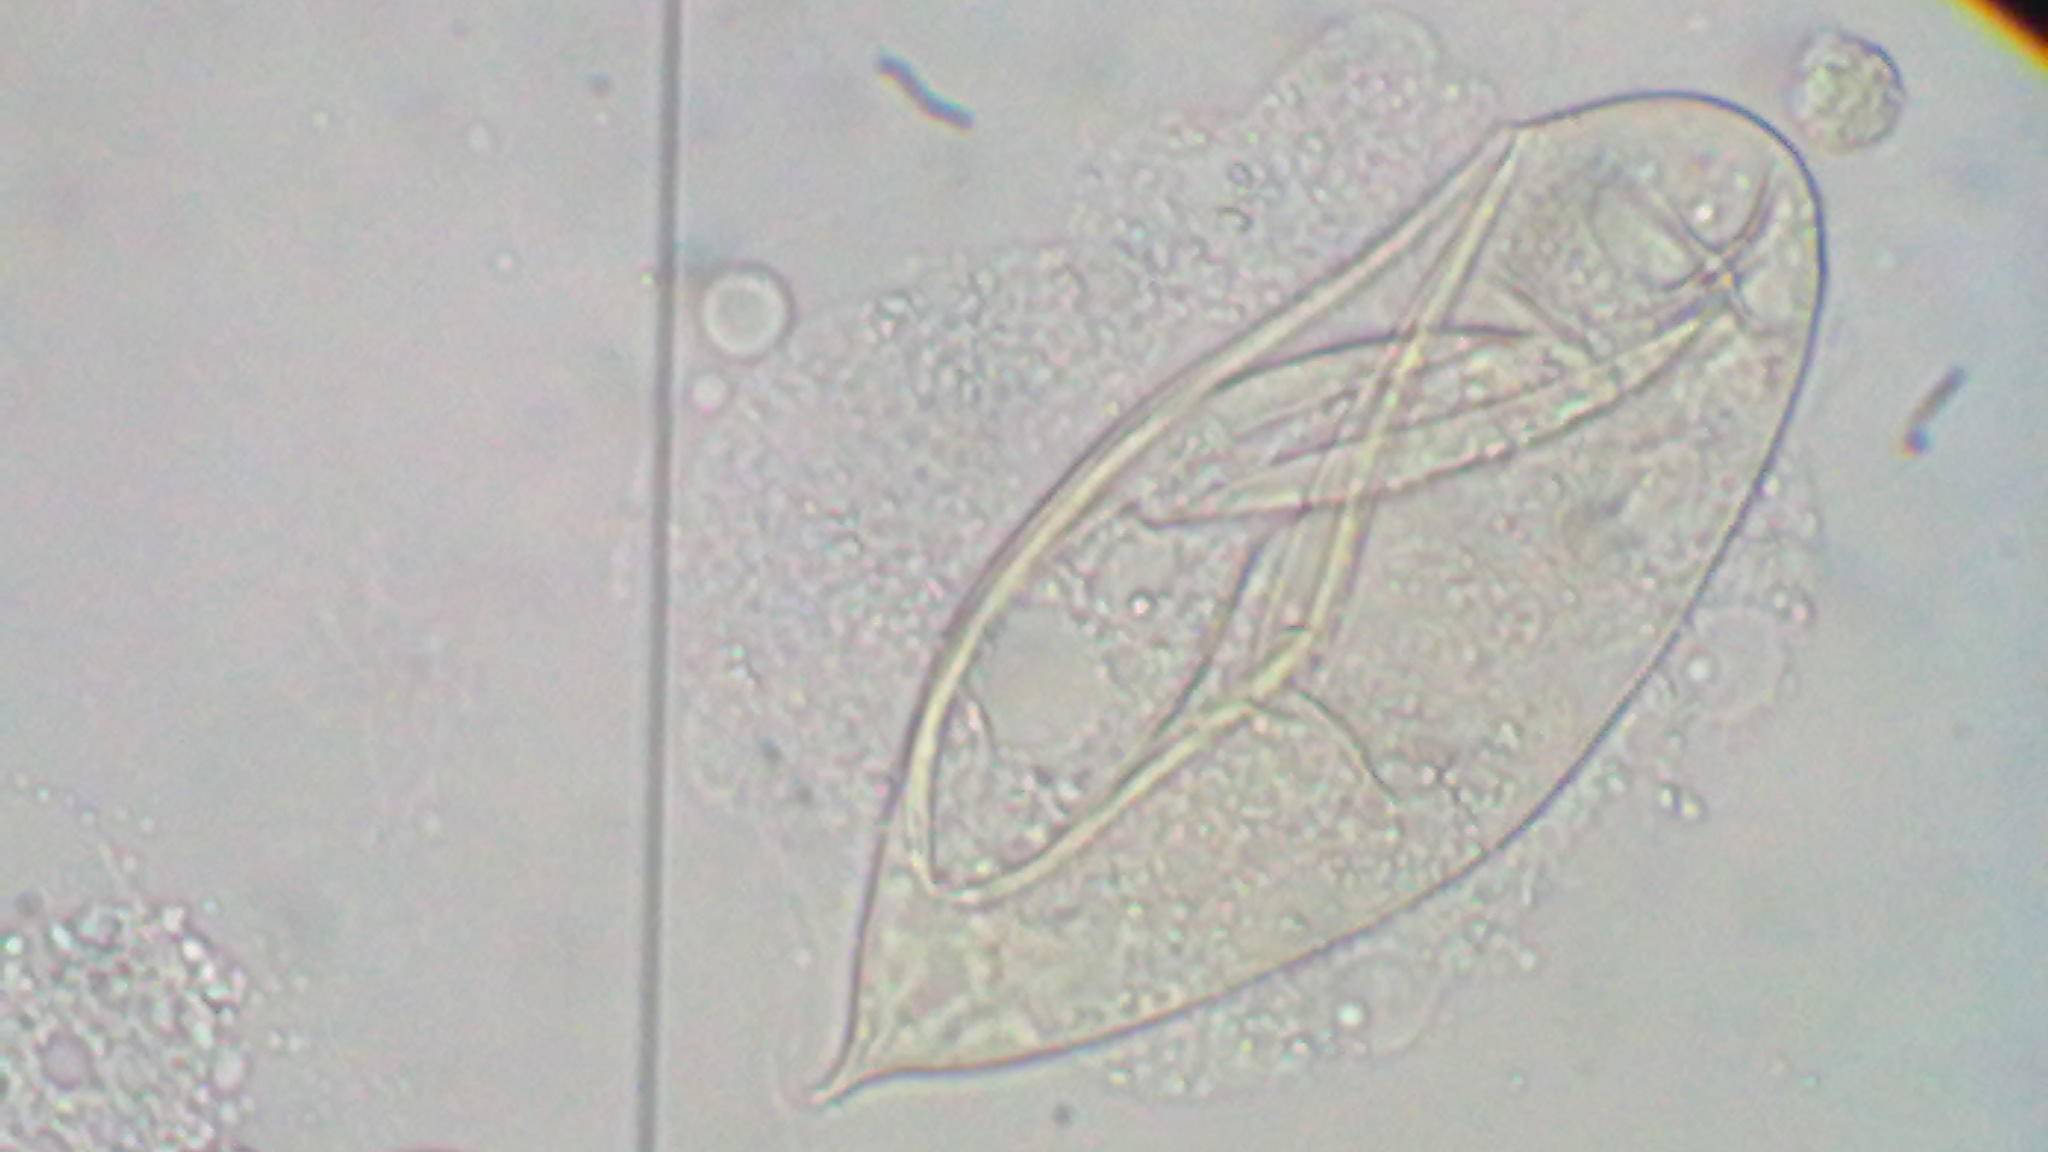 An image of a Schistosoma haematobium egg, a parasite that causes an infection.